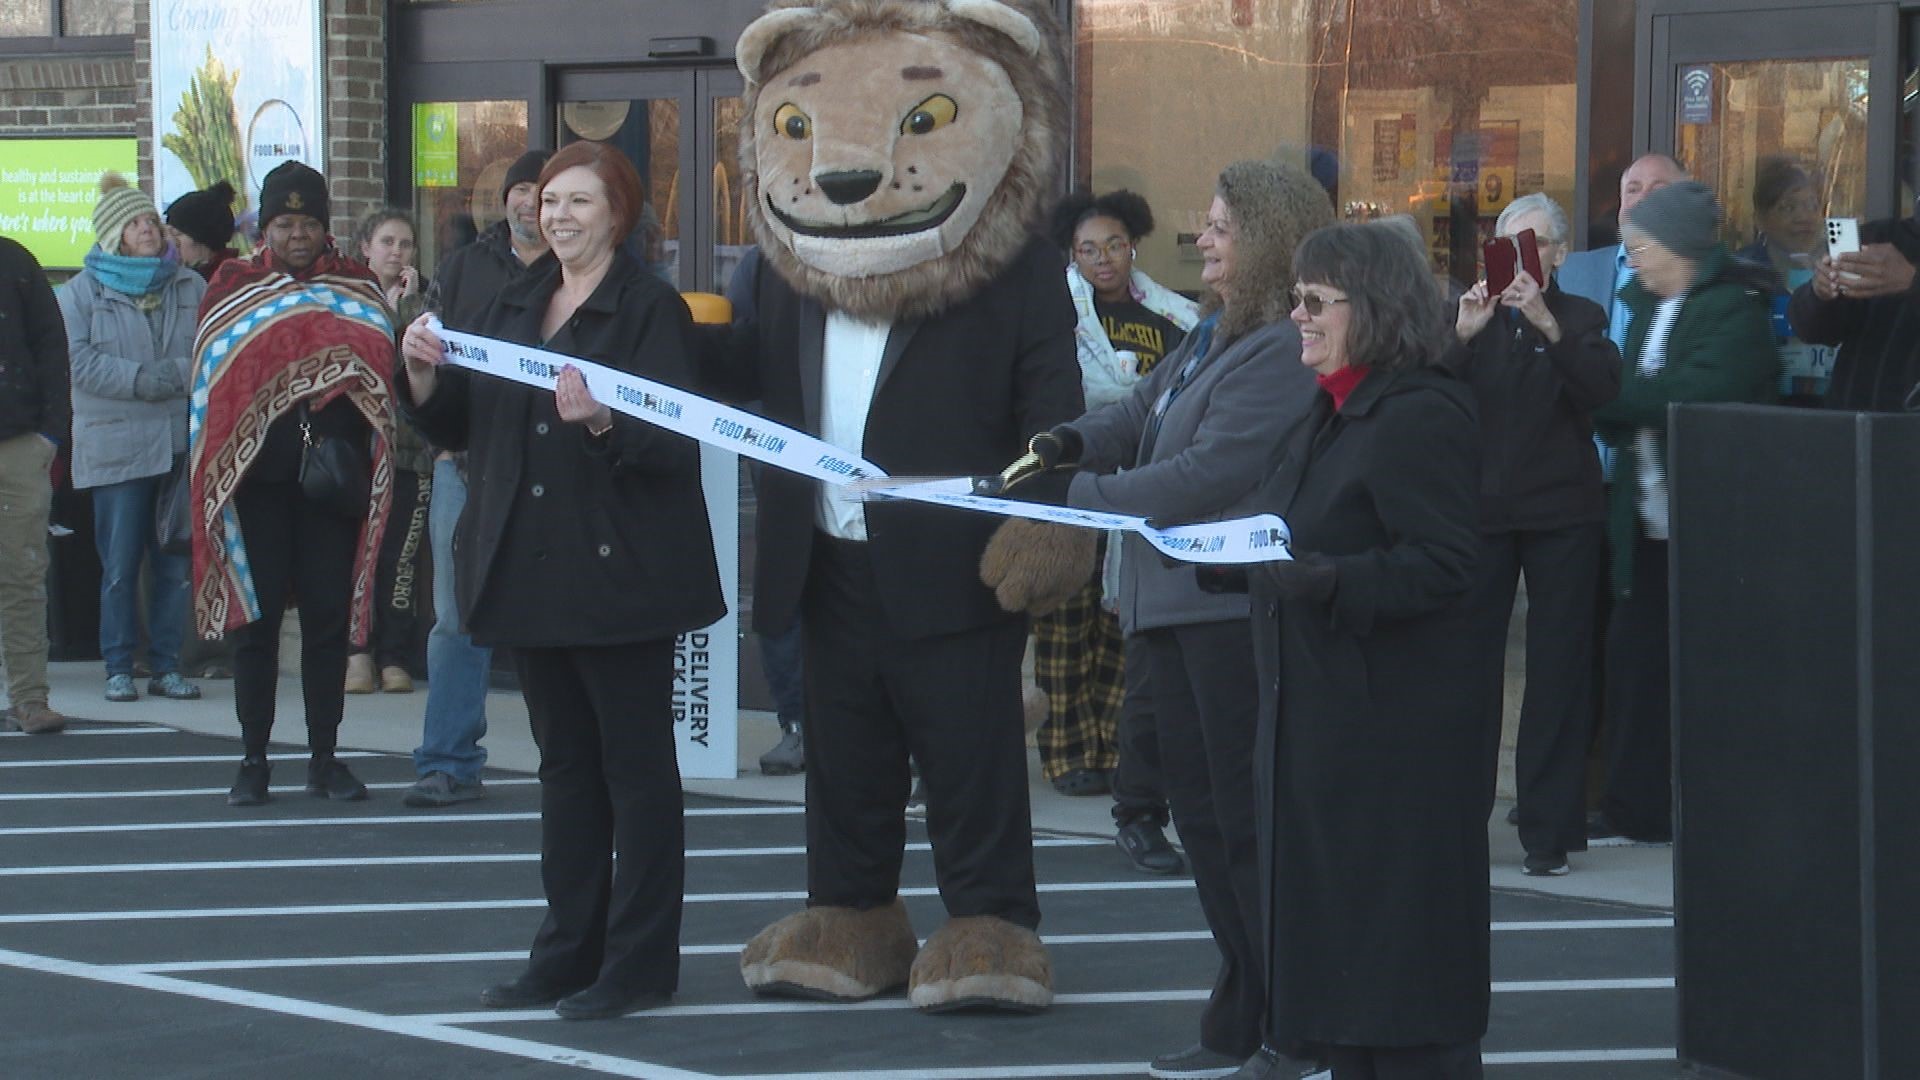 Food Lion opened its new location on North Main Street in Kernersville. The first 100 shoppers got mystery gift cards.